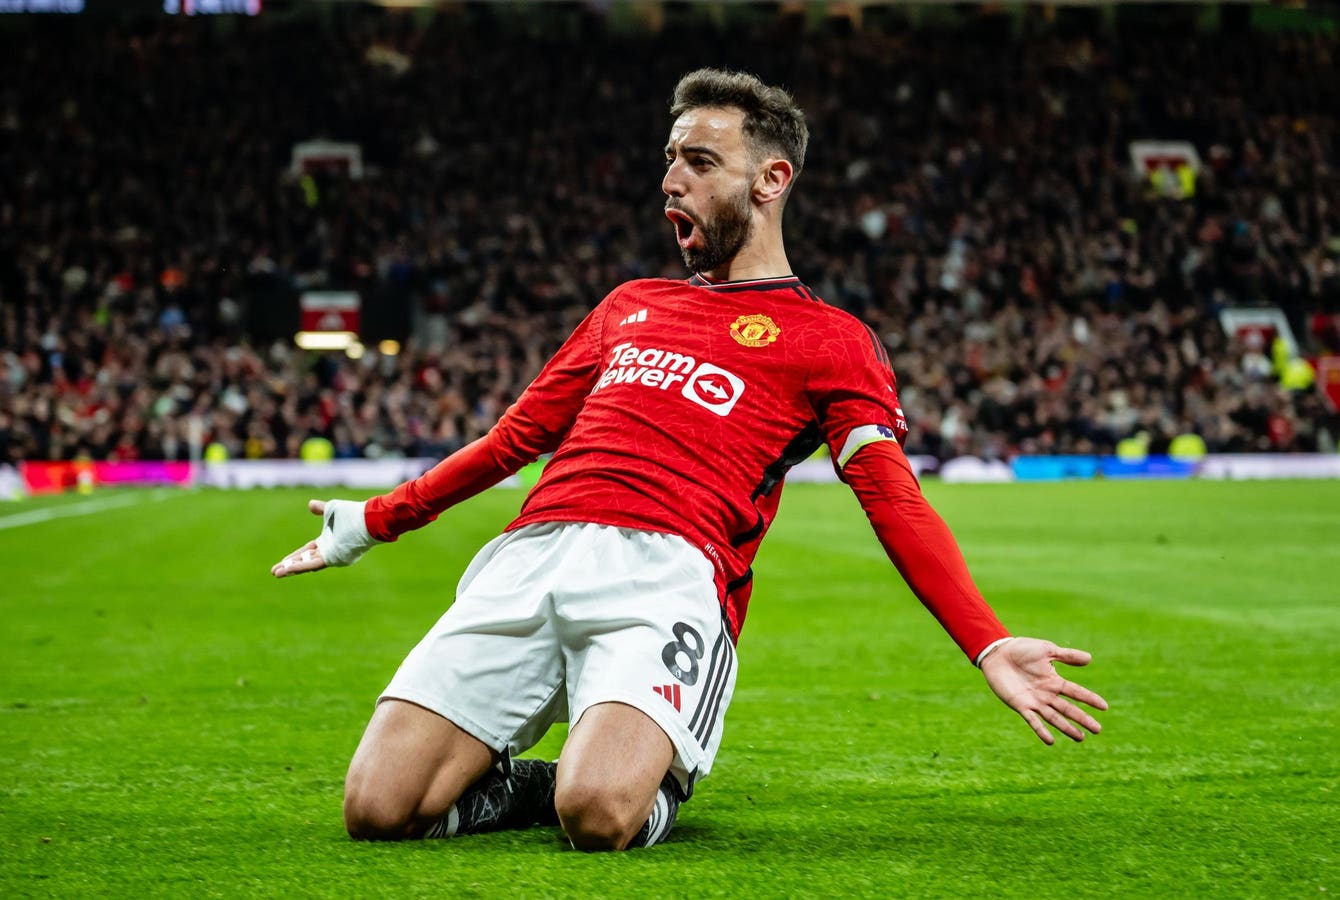 Manchester United’s Player Of The Year Is Bruno Fernandes